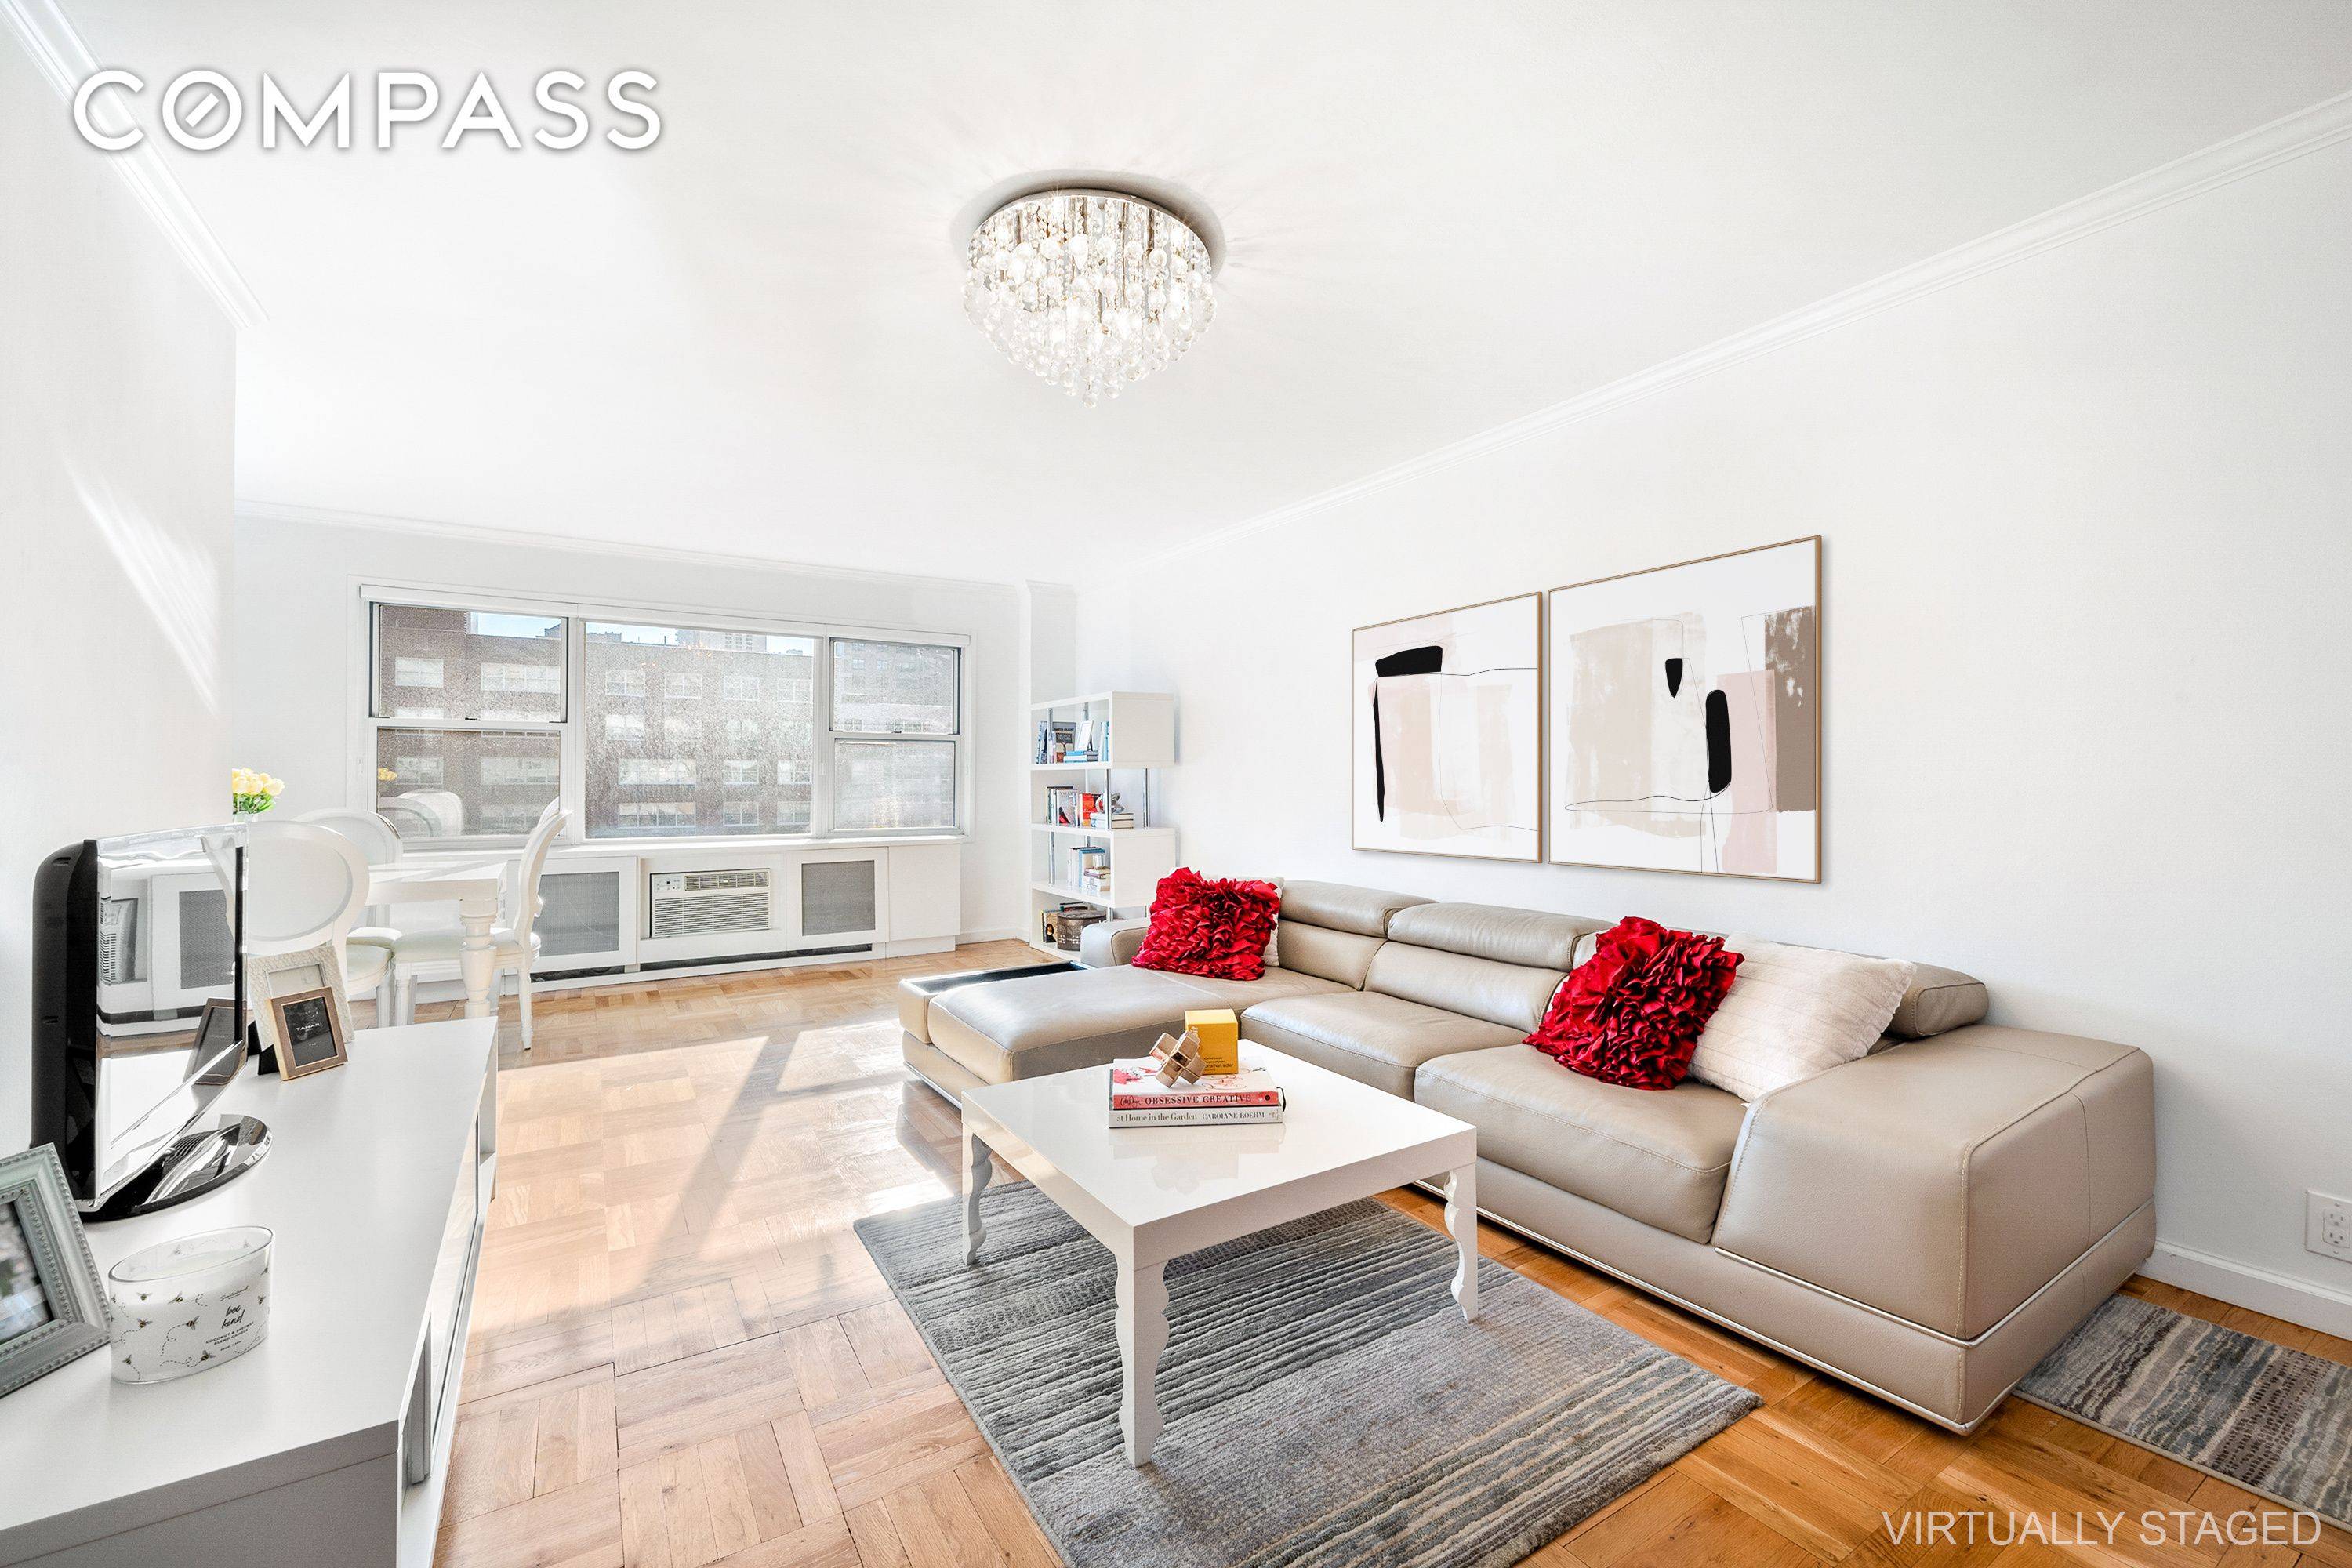 Located in the heart of the Upper East Side, 10F is a sun flooded, south facing, convertible two bedroom home.